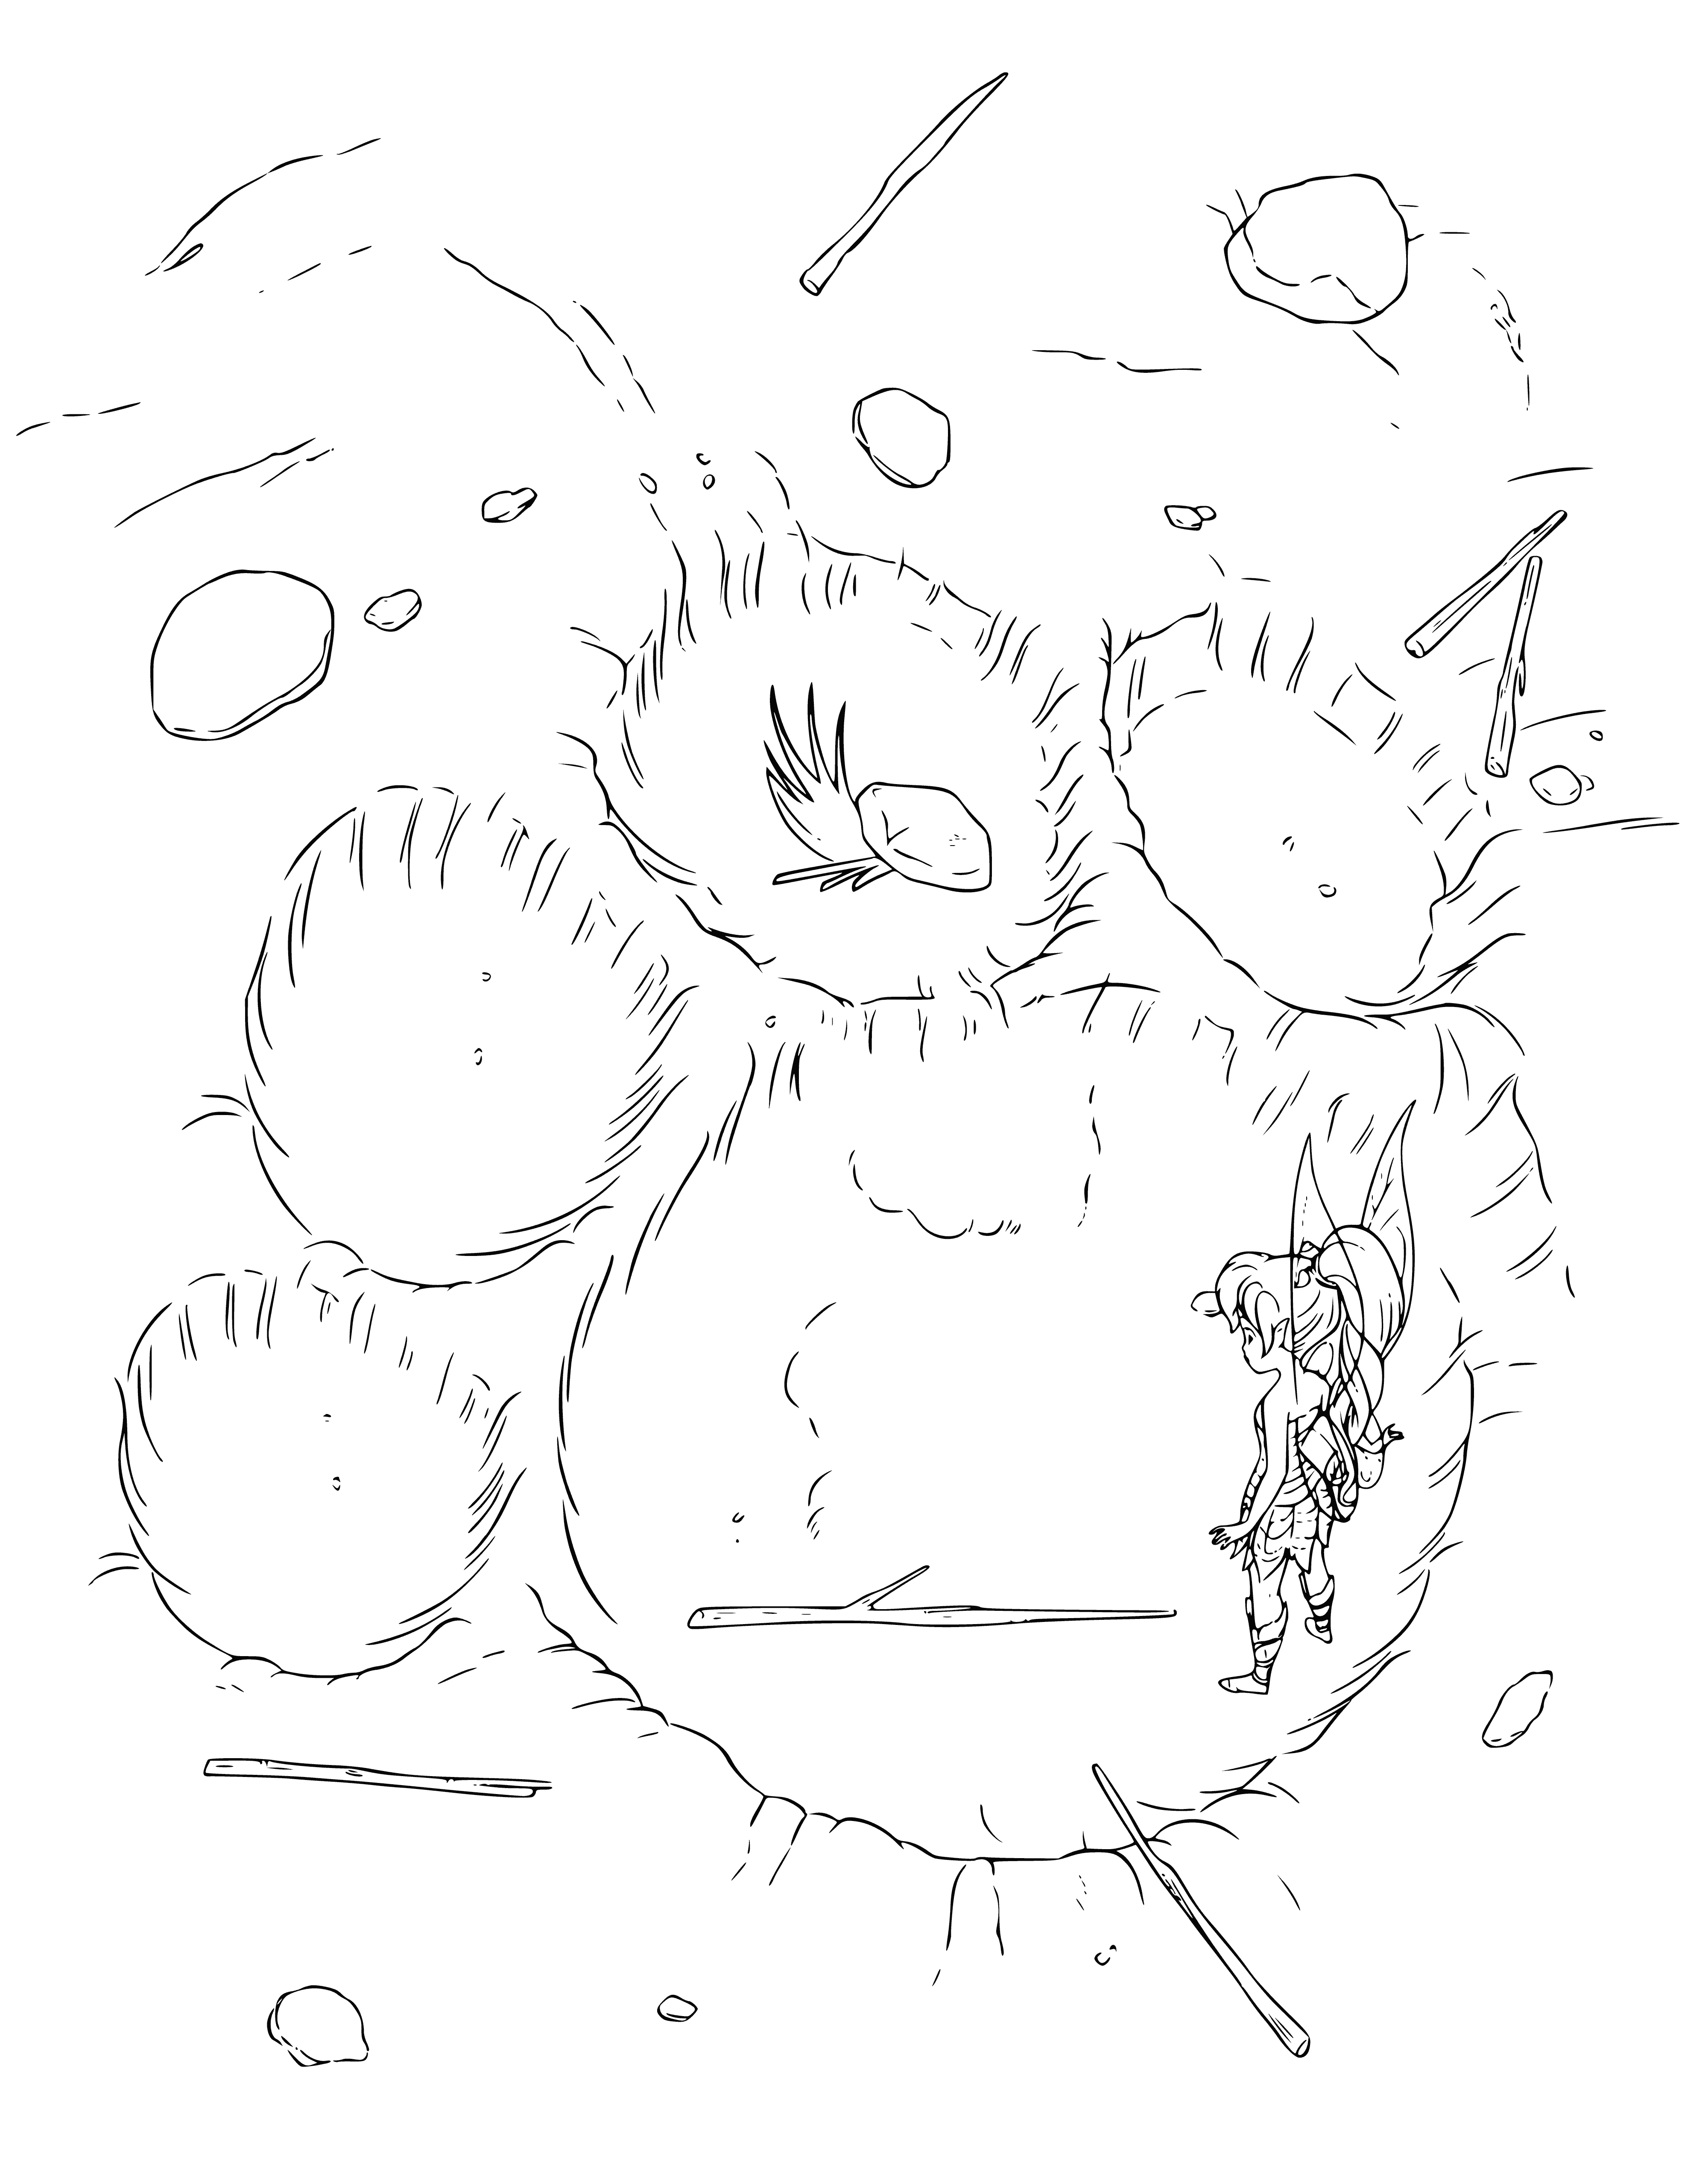 Fauna found traces of a huge unknown beast coloring page